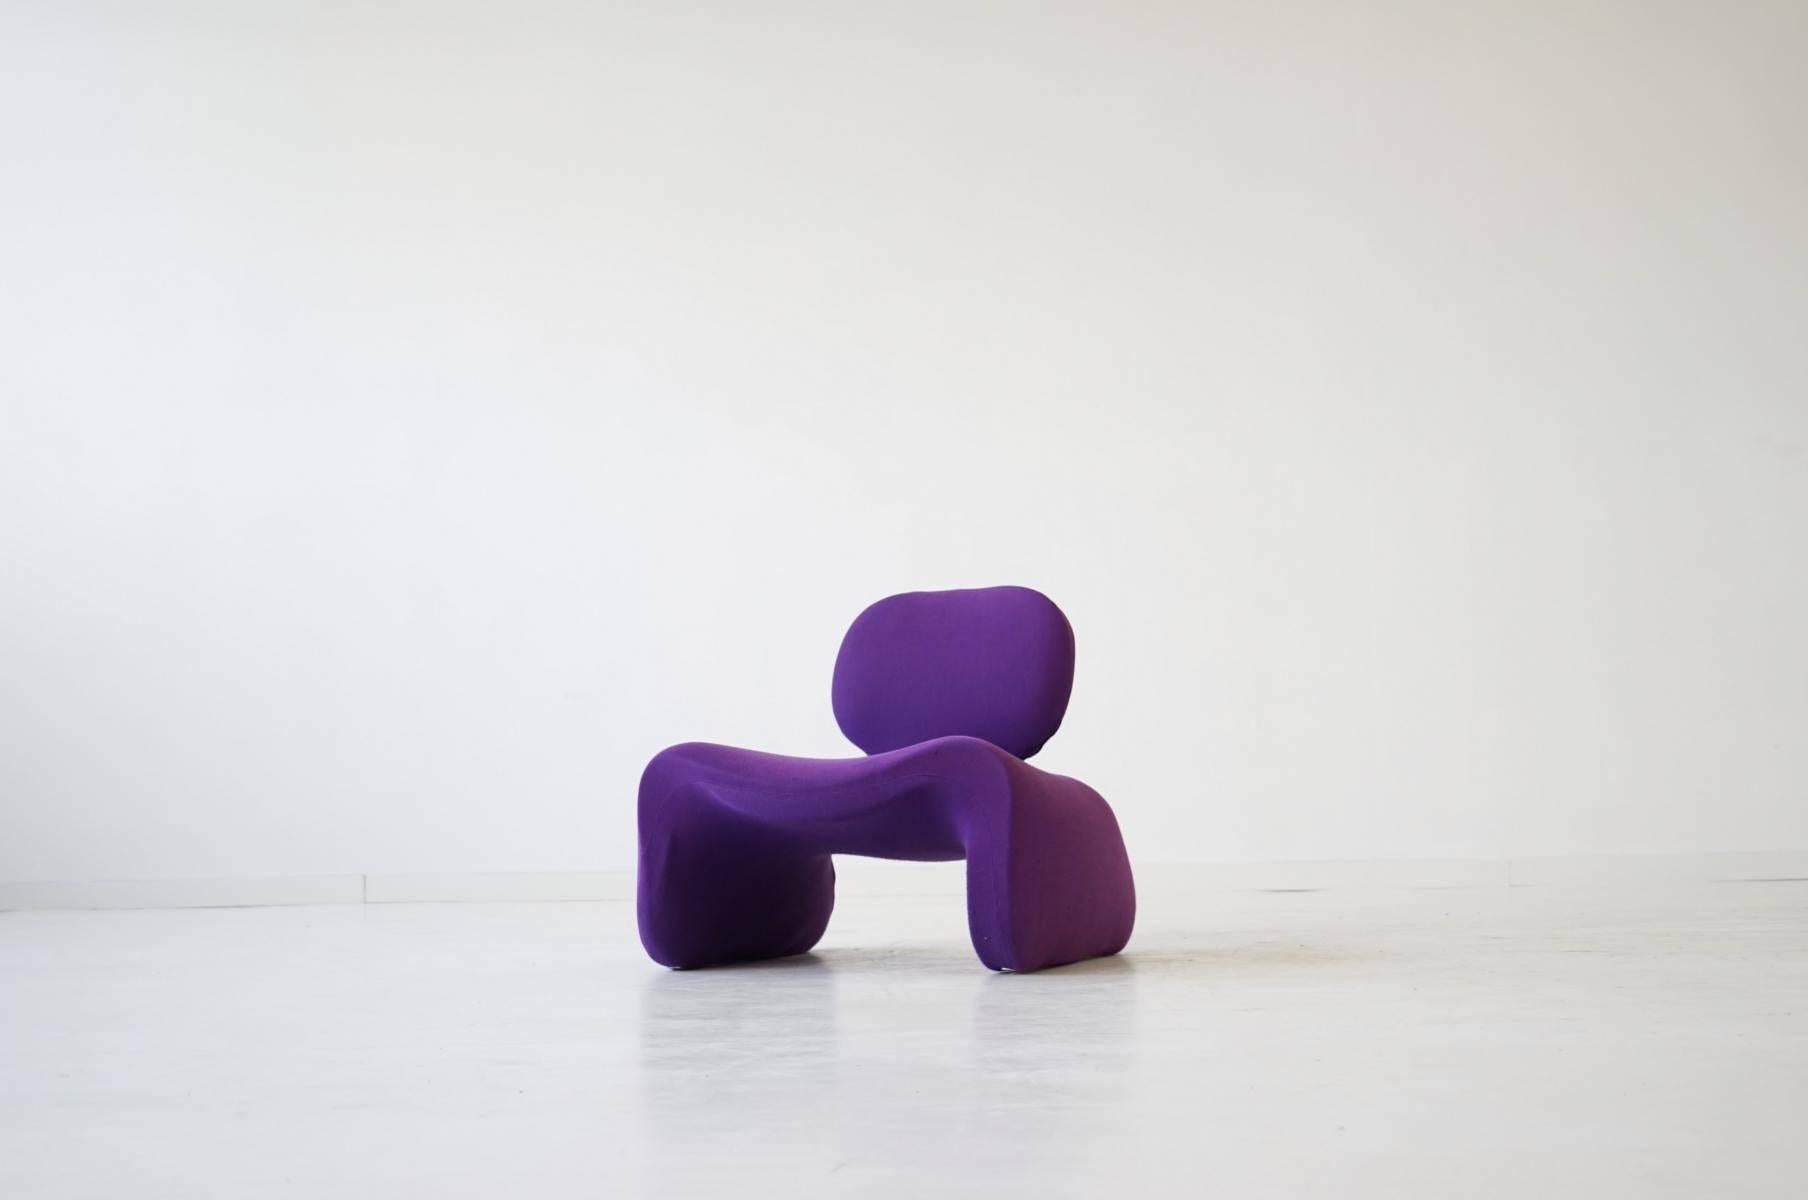 Lounge chair by Olivier Mourgue for Airborne Djinn Space Age, 1960s
Model djinn by Olivier Mourgue for Airborne, 1965.
Violet original upholstery. Great condition, the foam is very good.